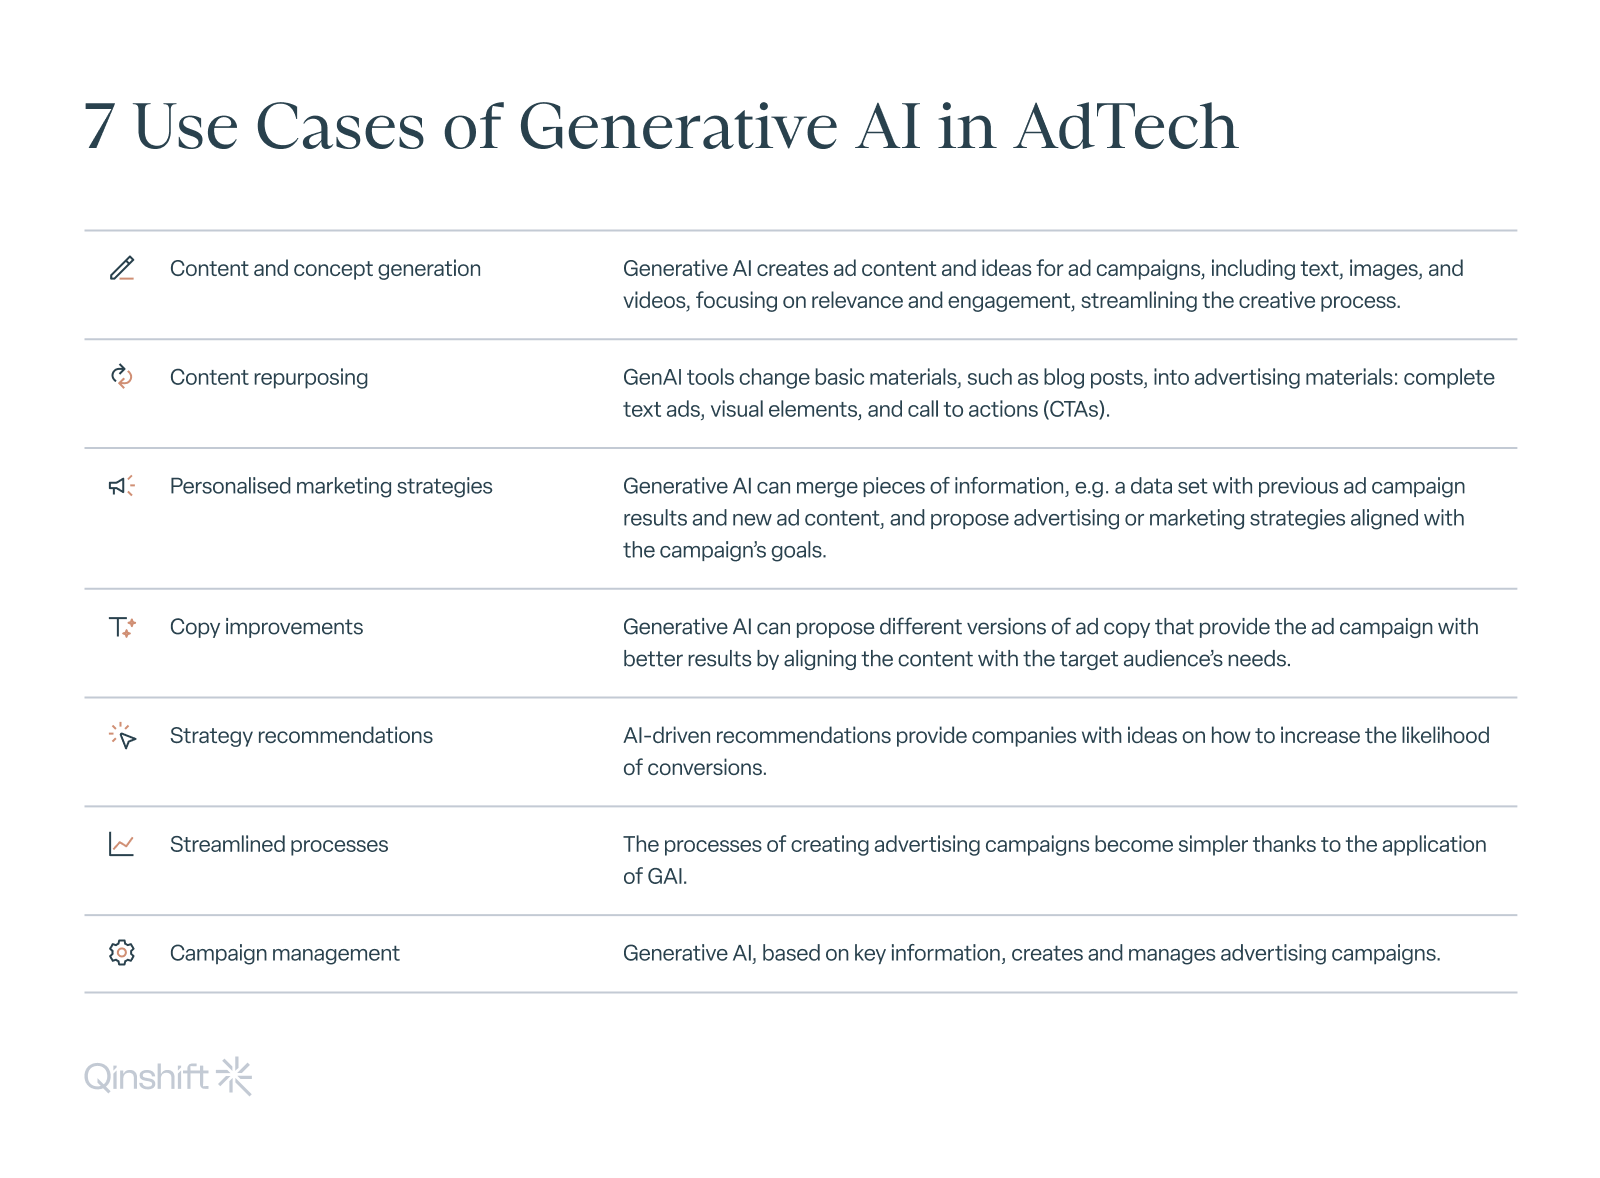 7 Use Cases of Generative AI in AdTech